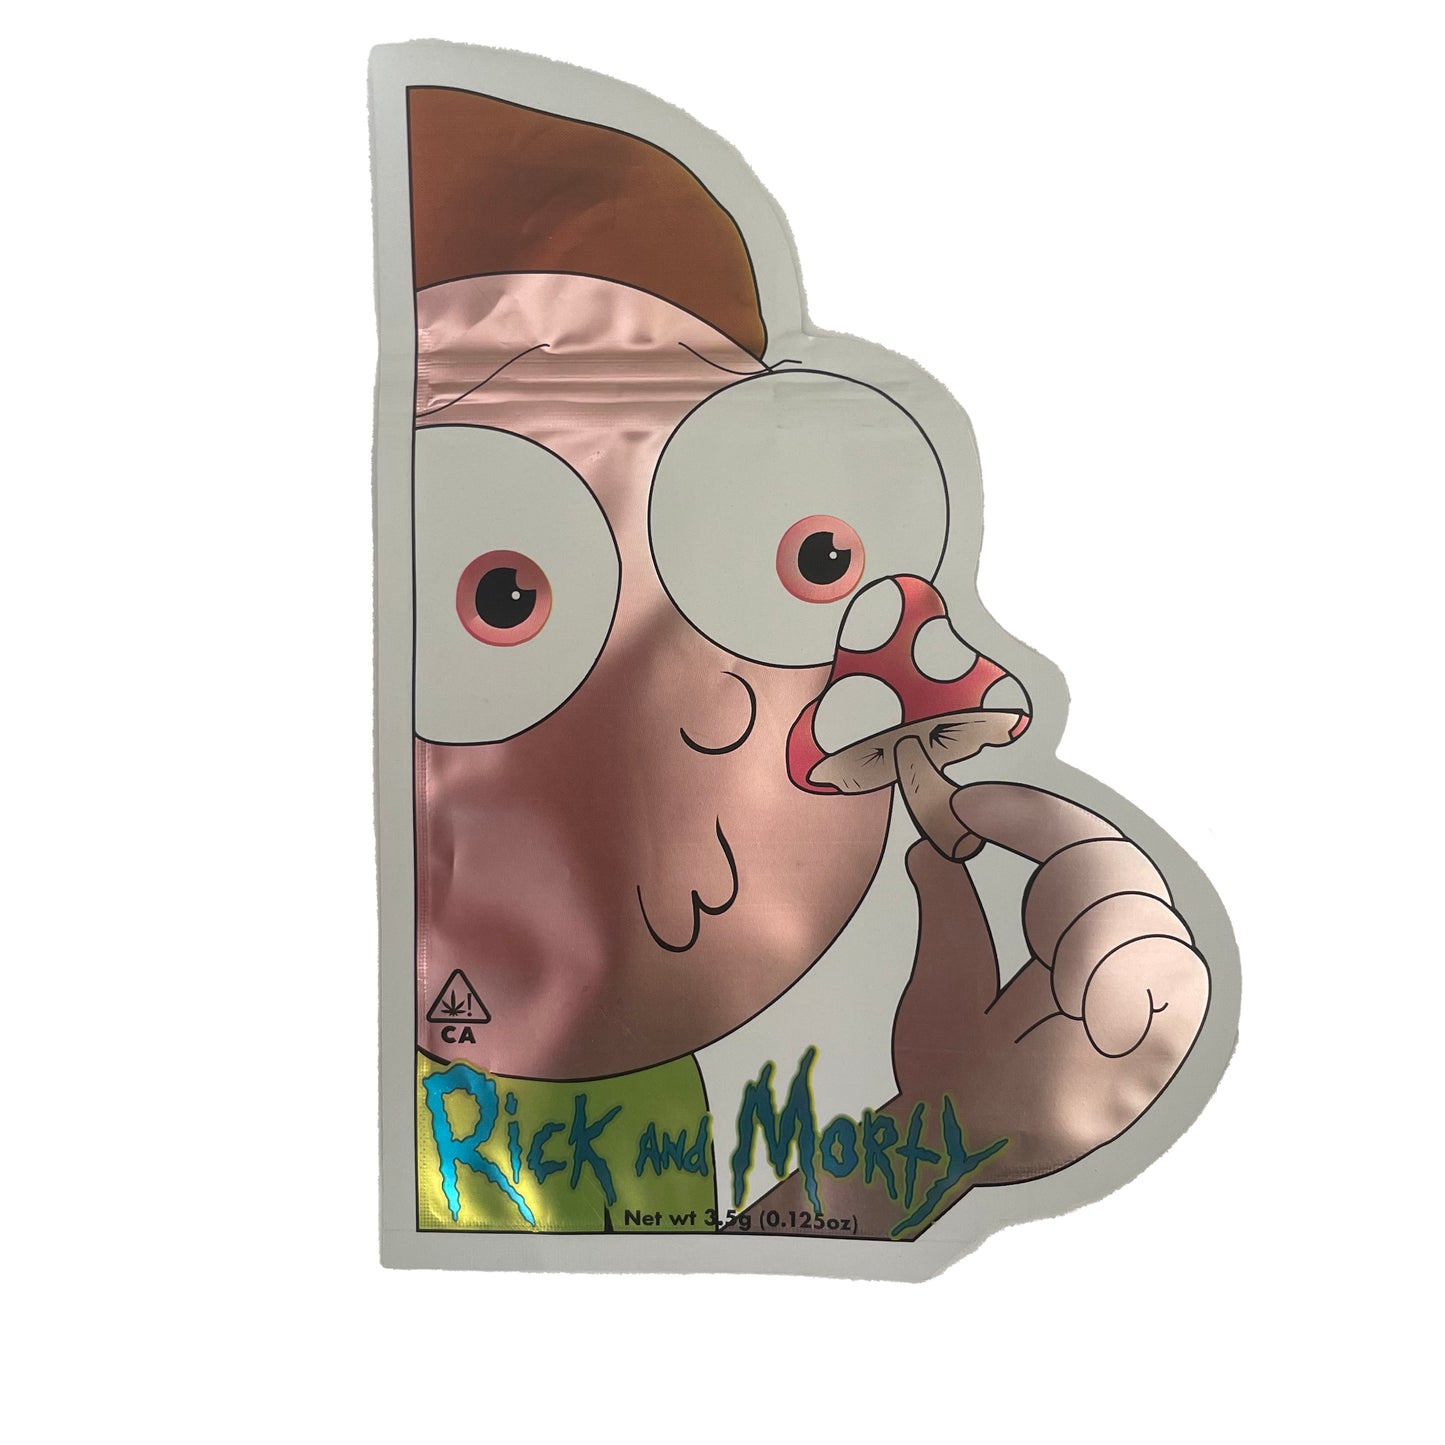 Morty by Rick and Morty Cutout 3.5G Mylar Bags